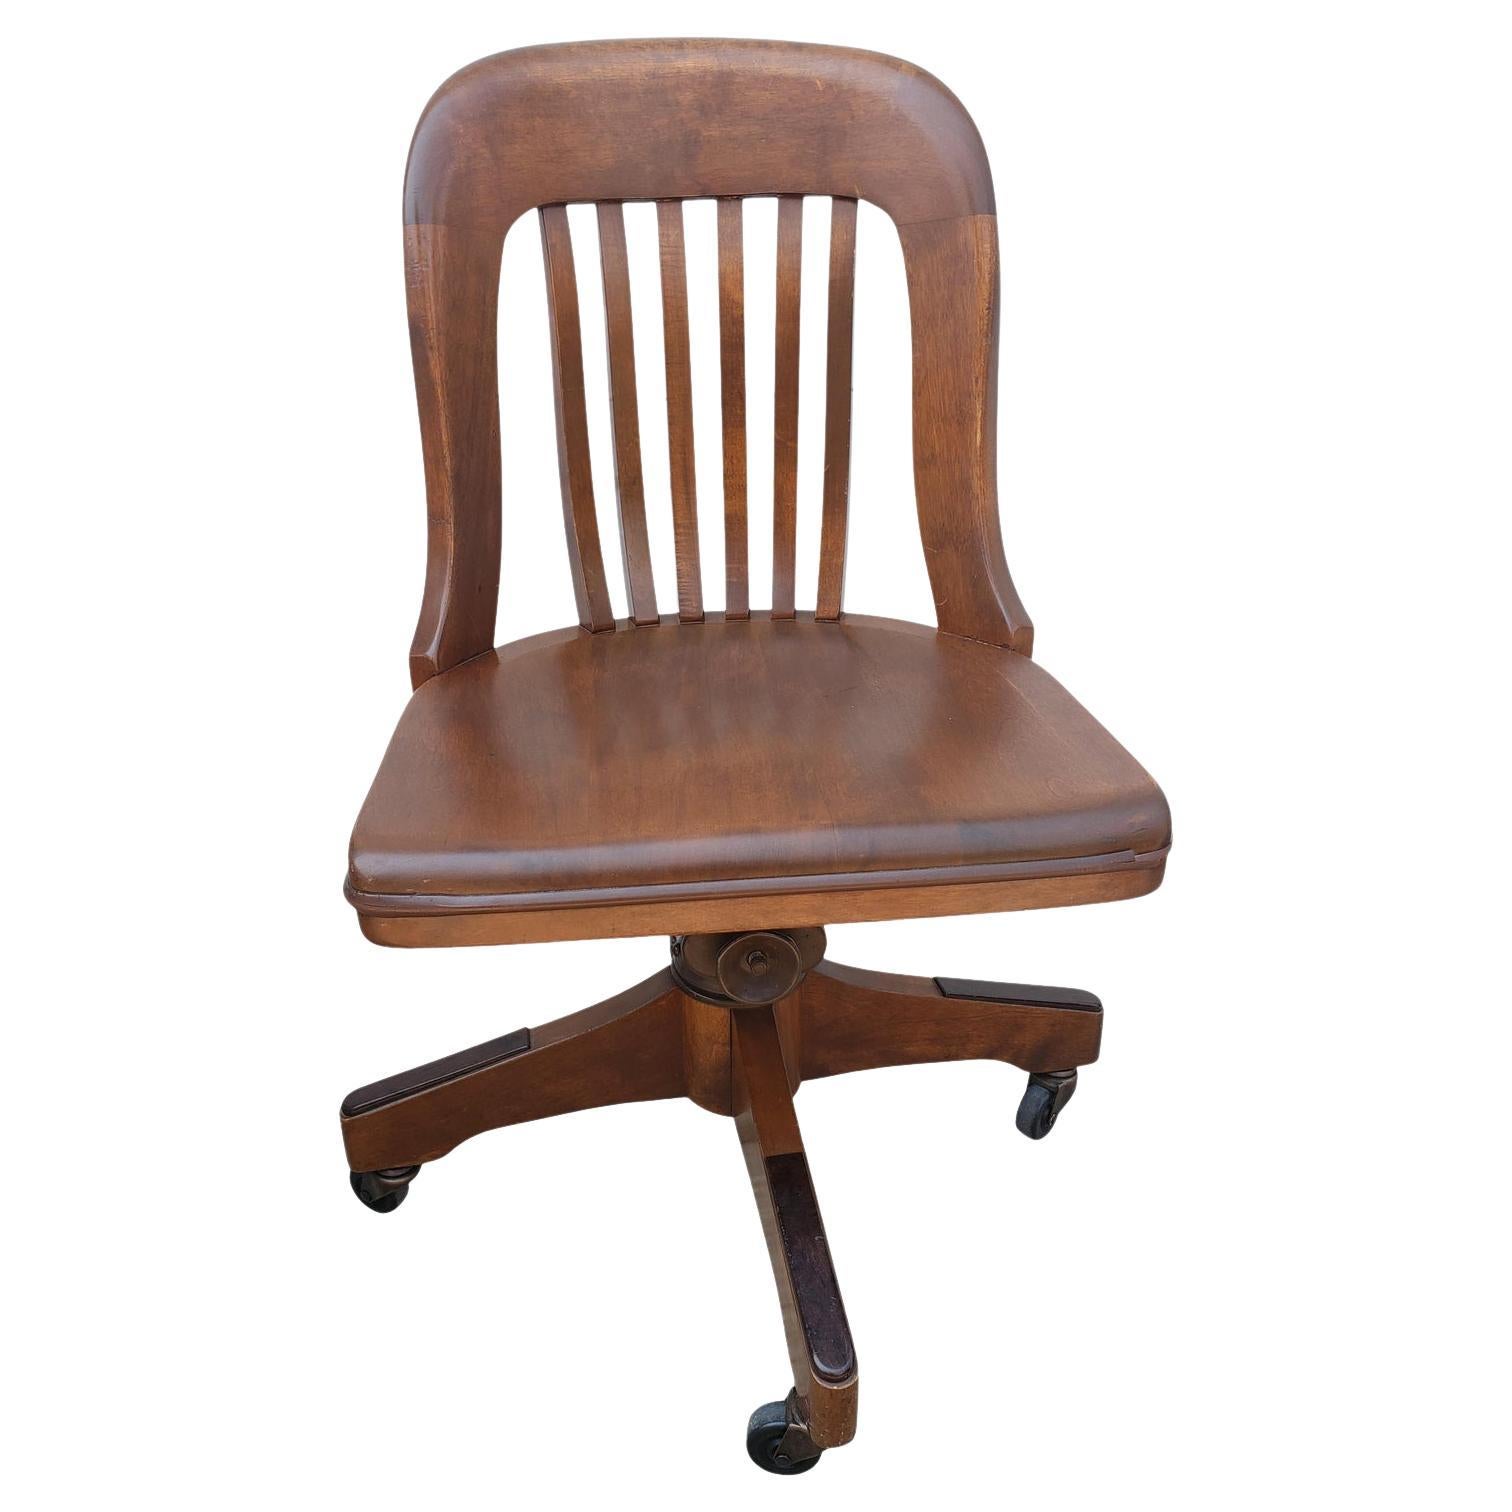 The Taylor Chair Co. Antique Oak Bankers Chair